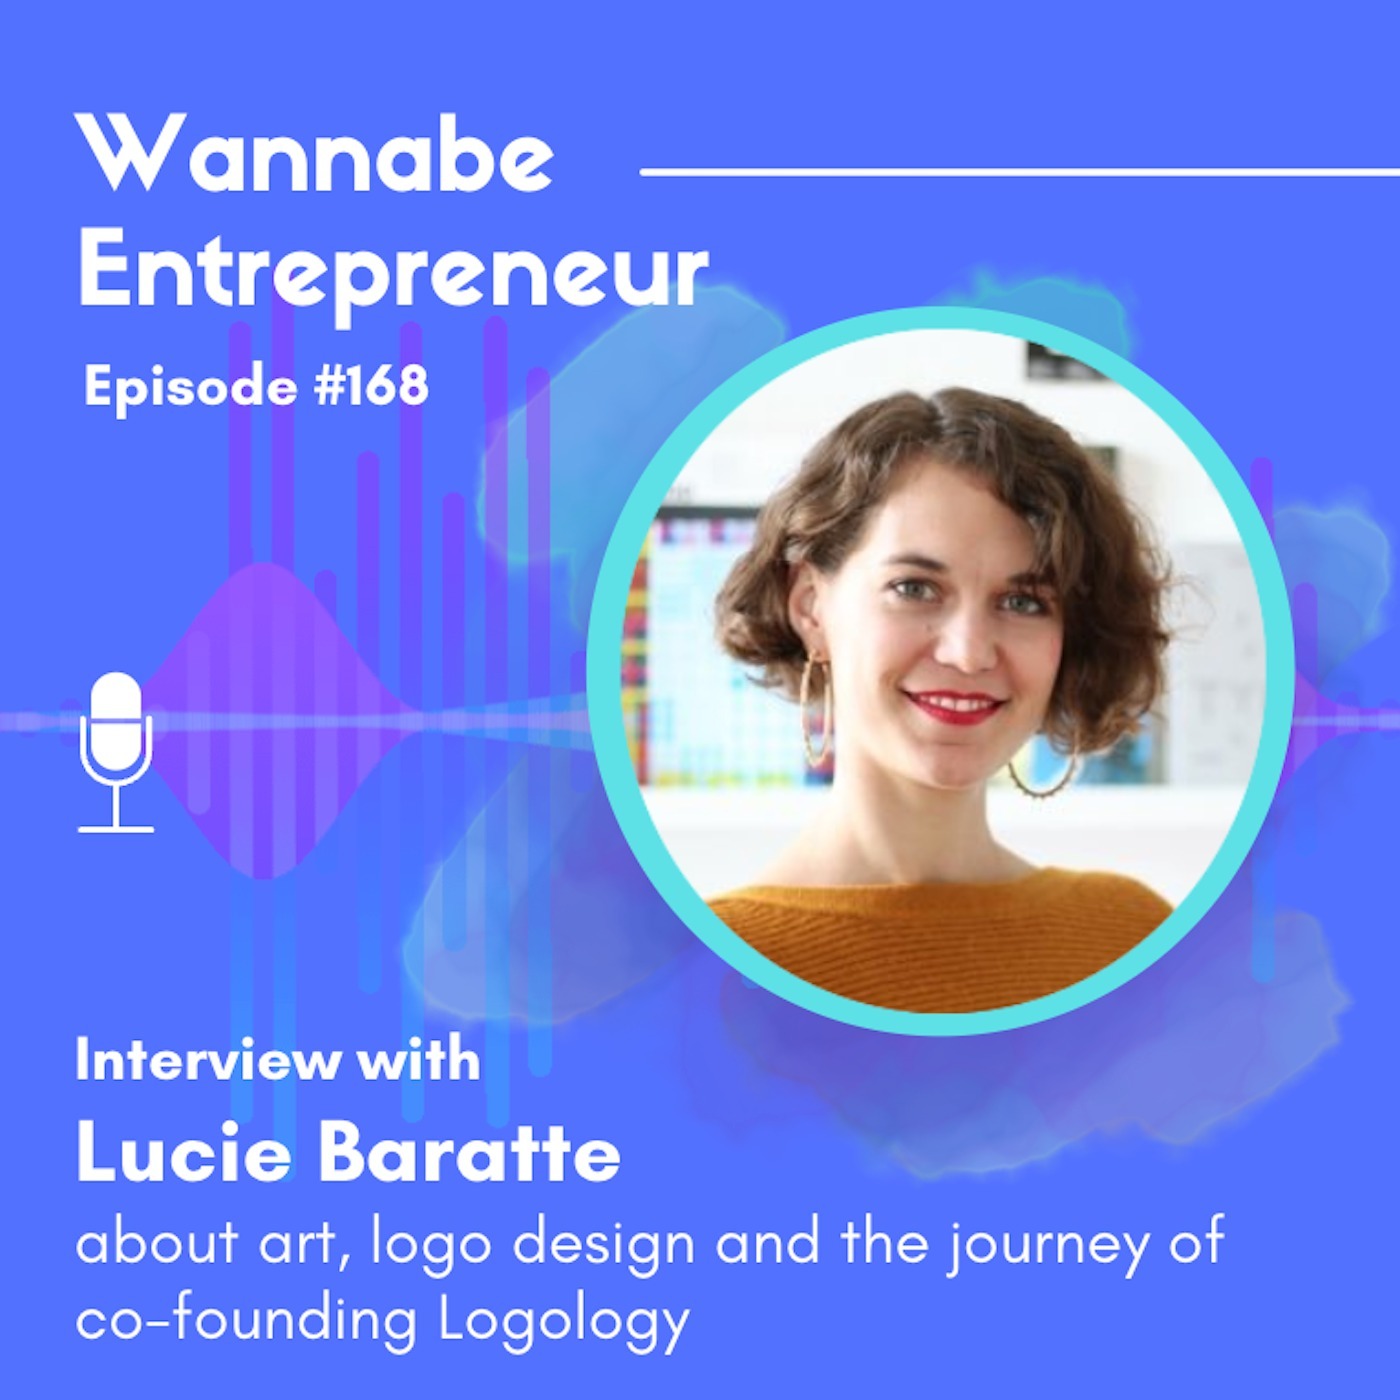 Interviewing Lucie about art, logo design and cofounding Logology